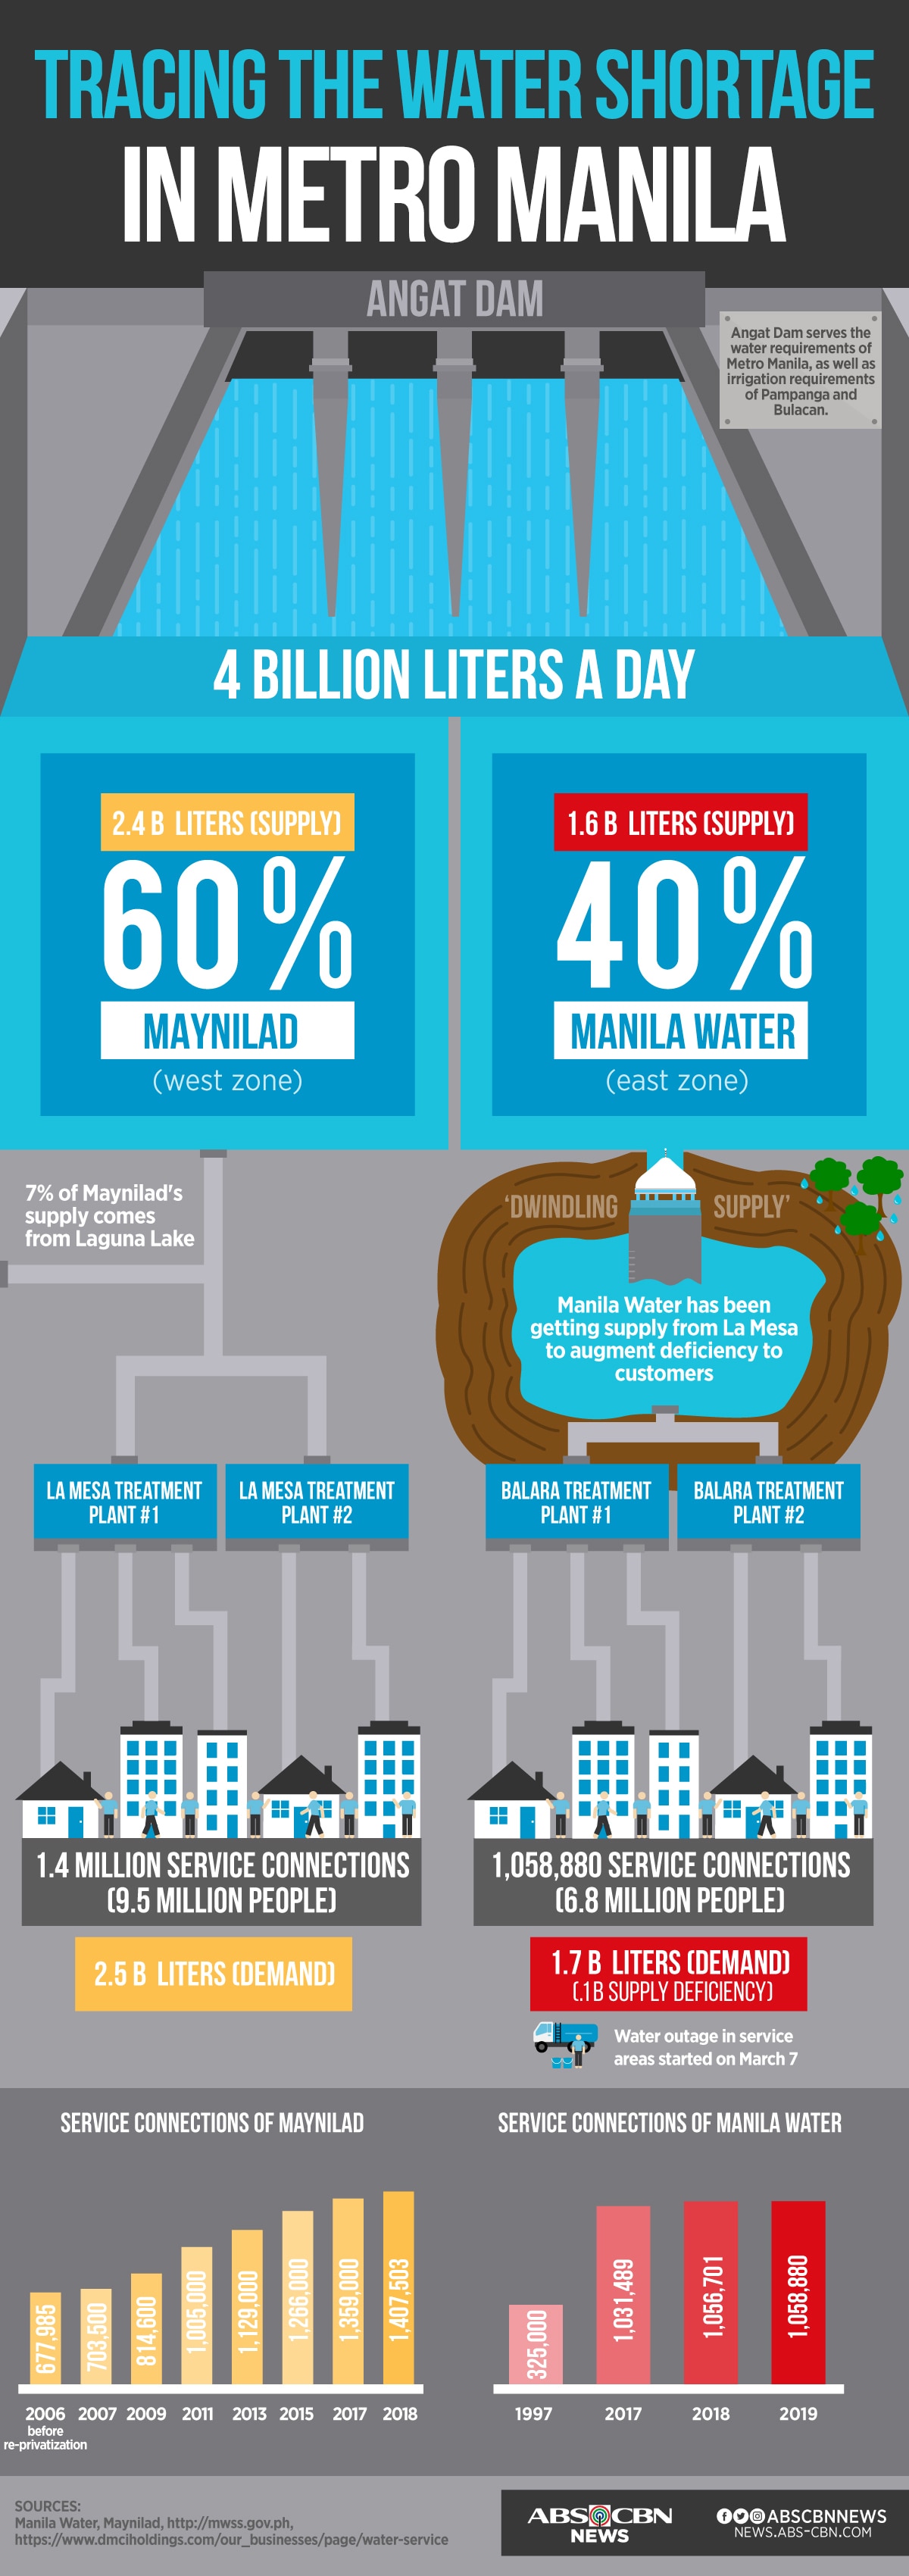 EXPLAINER: Why is there a water shortage in Metro Manila? 3